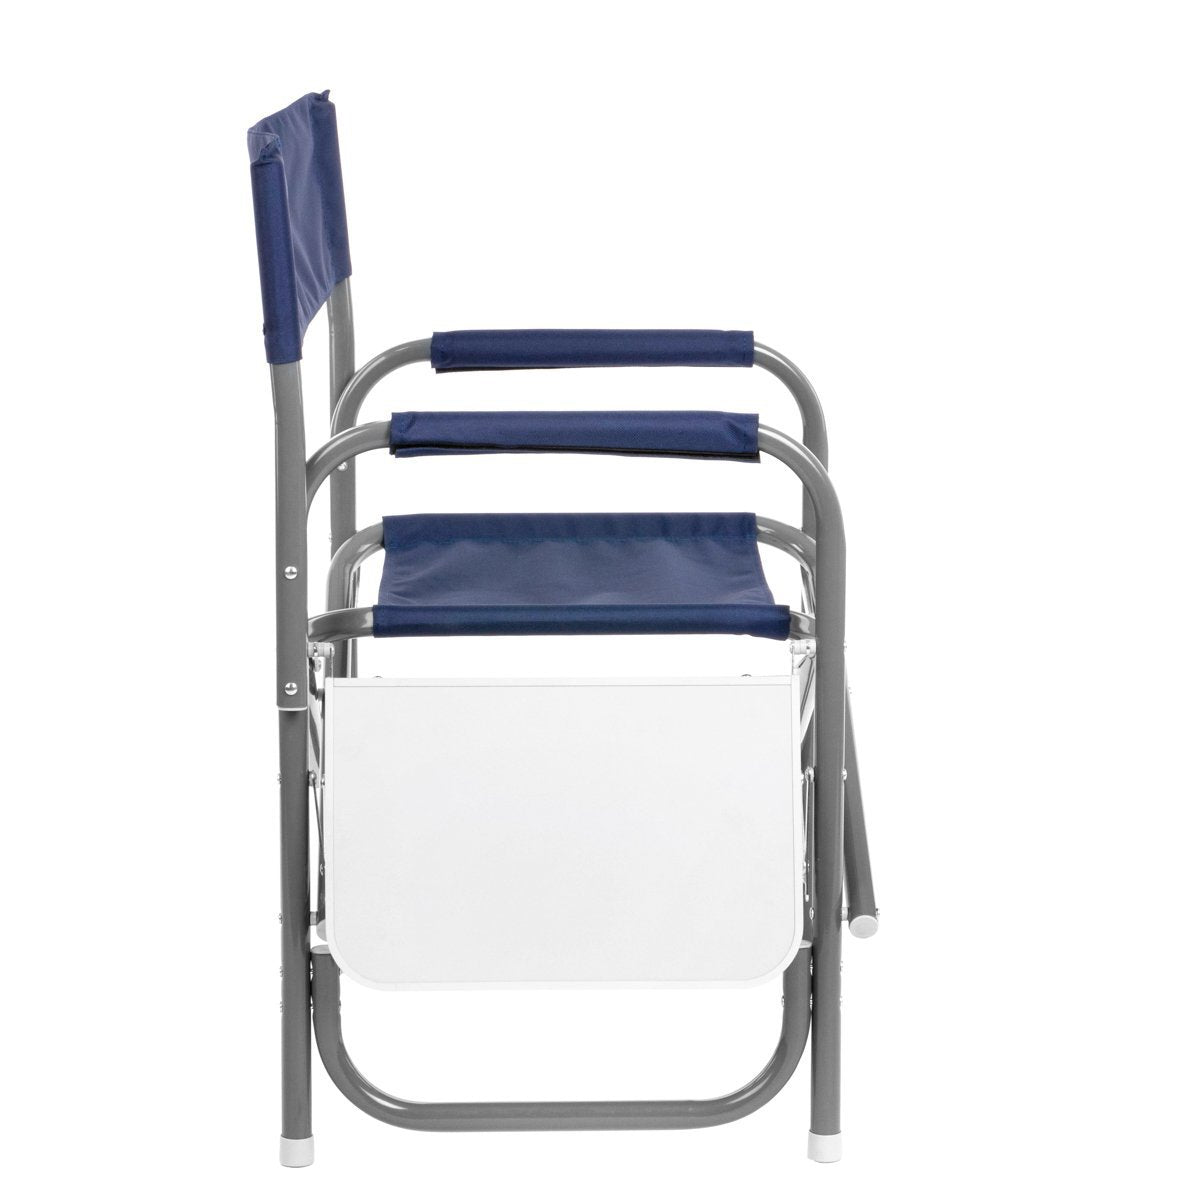 Nisus Aluminum Folding Director's Chair with Side Table